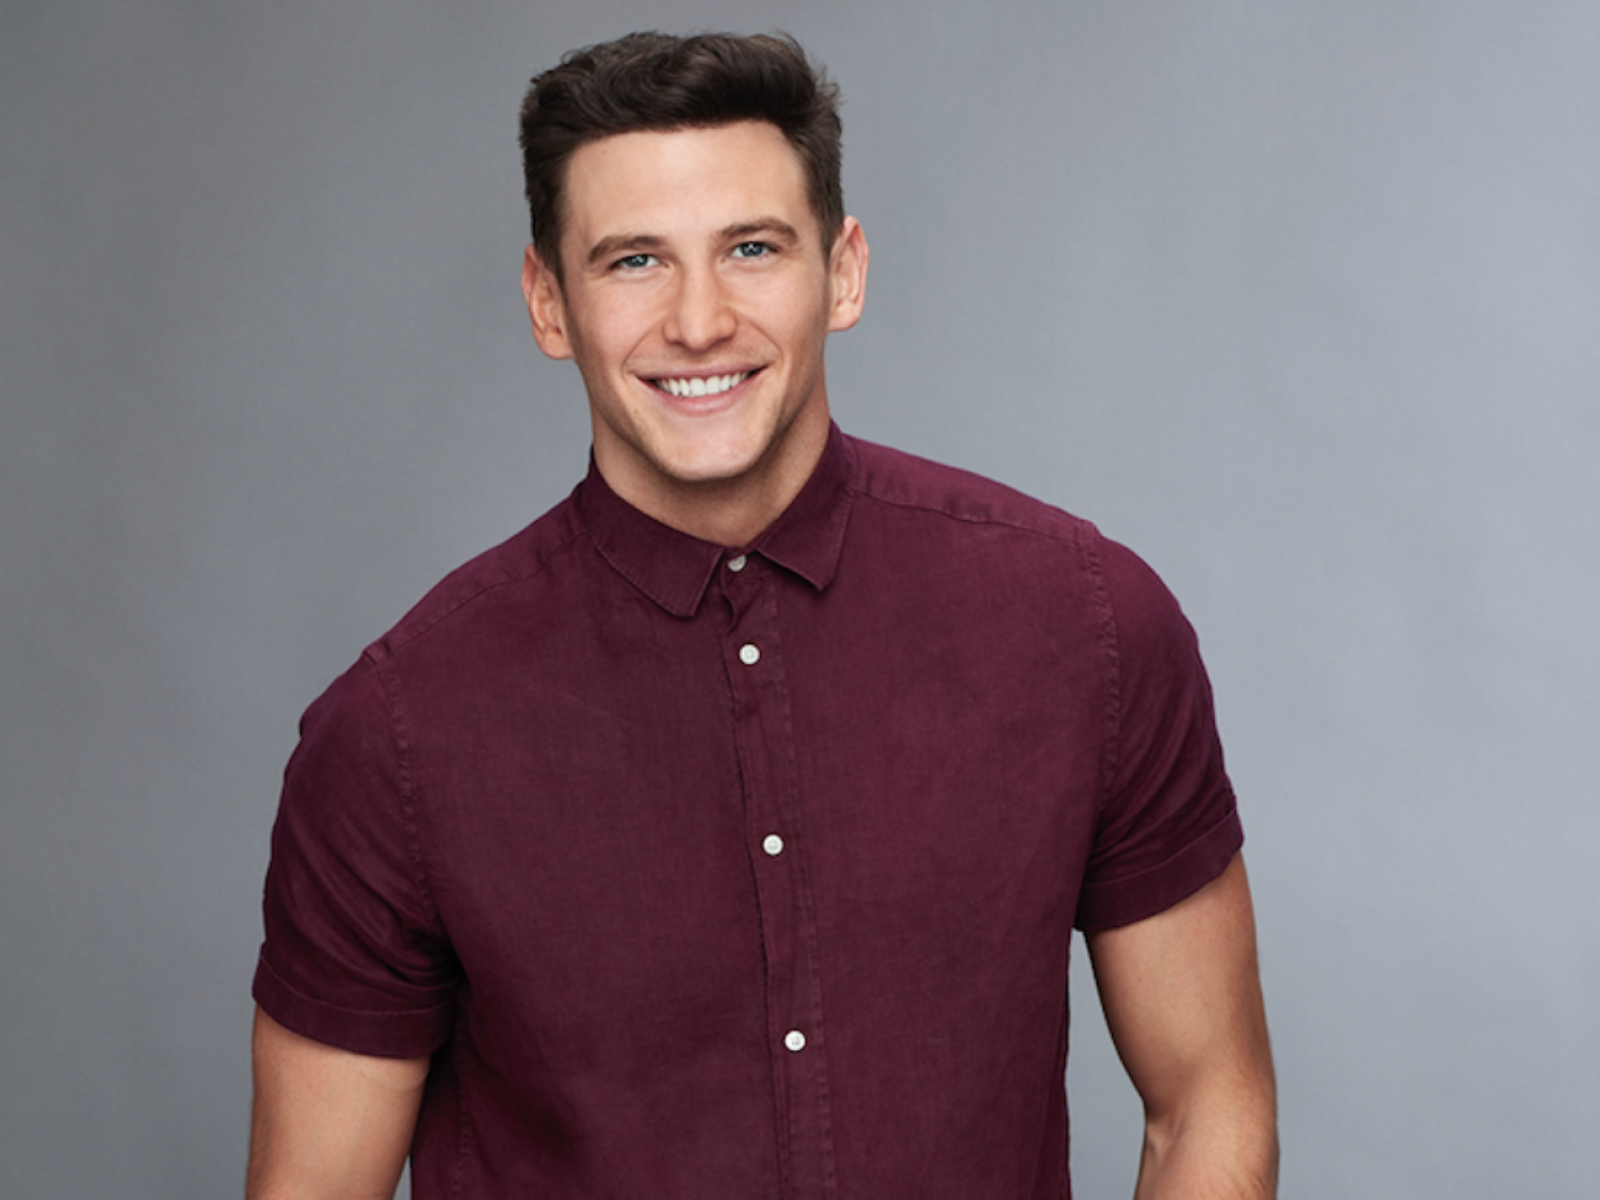 Bachelor Franchise star Blake Horstmann to host virtual Q&A with USF students